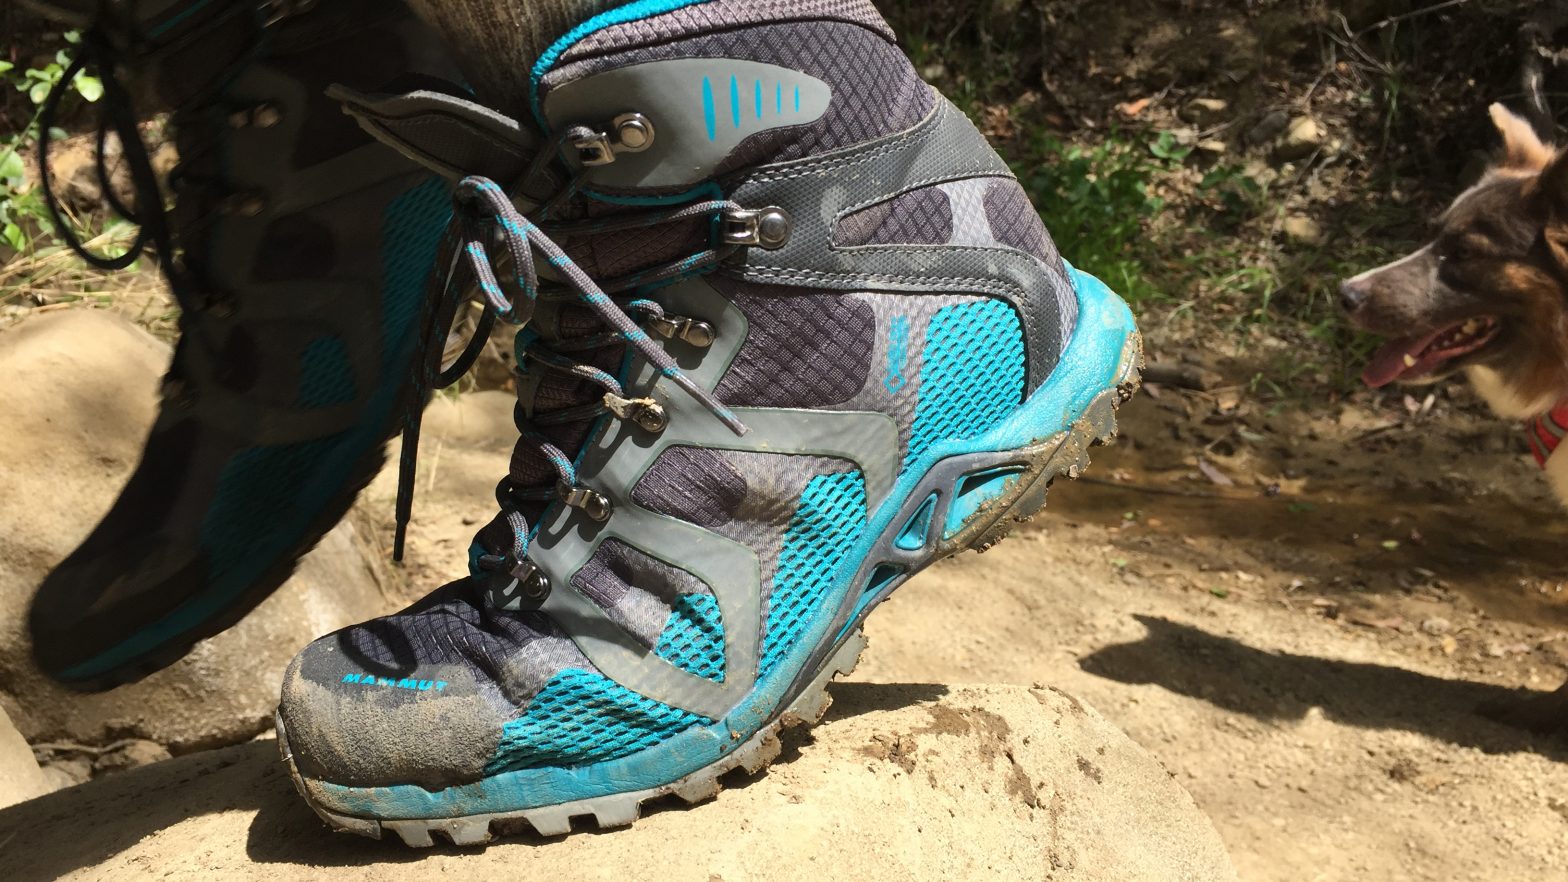 The Best Hiking Boots For Wide Feet